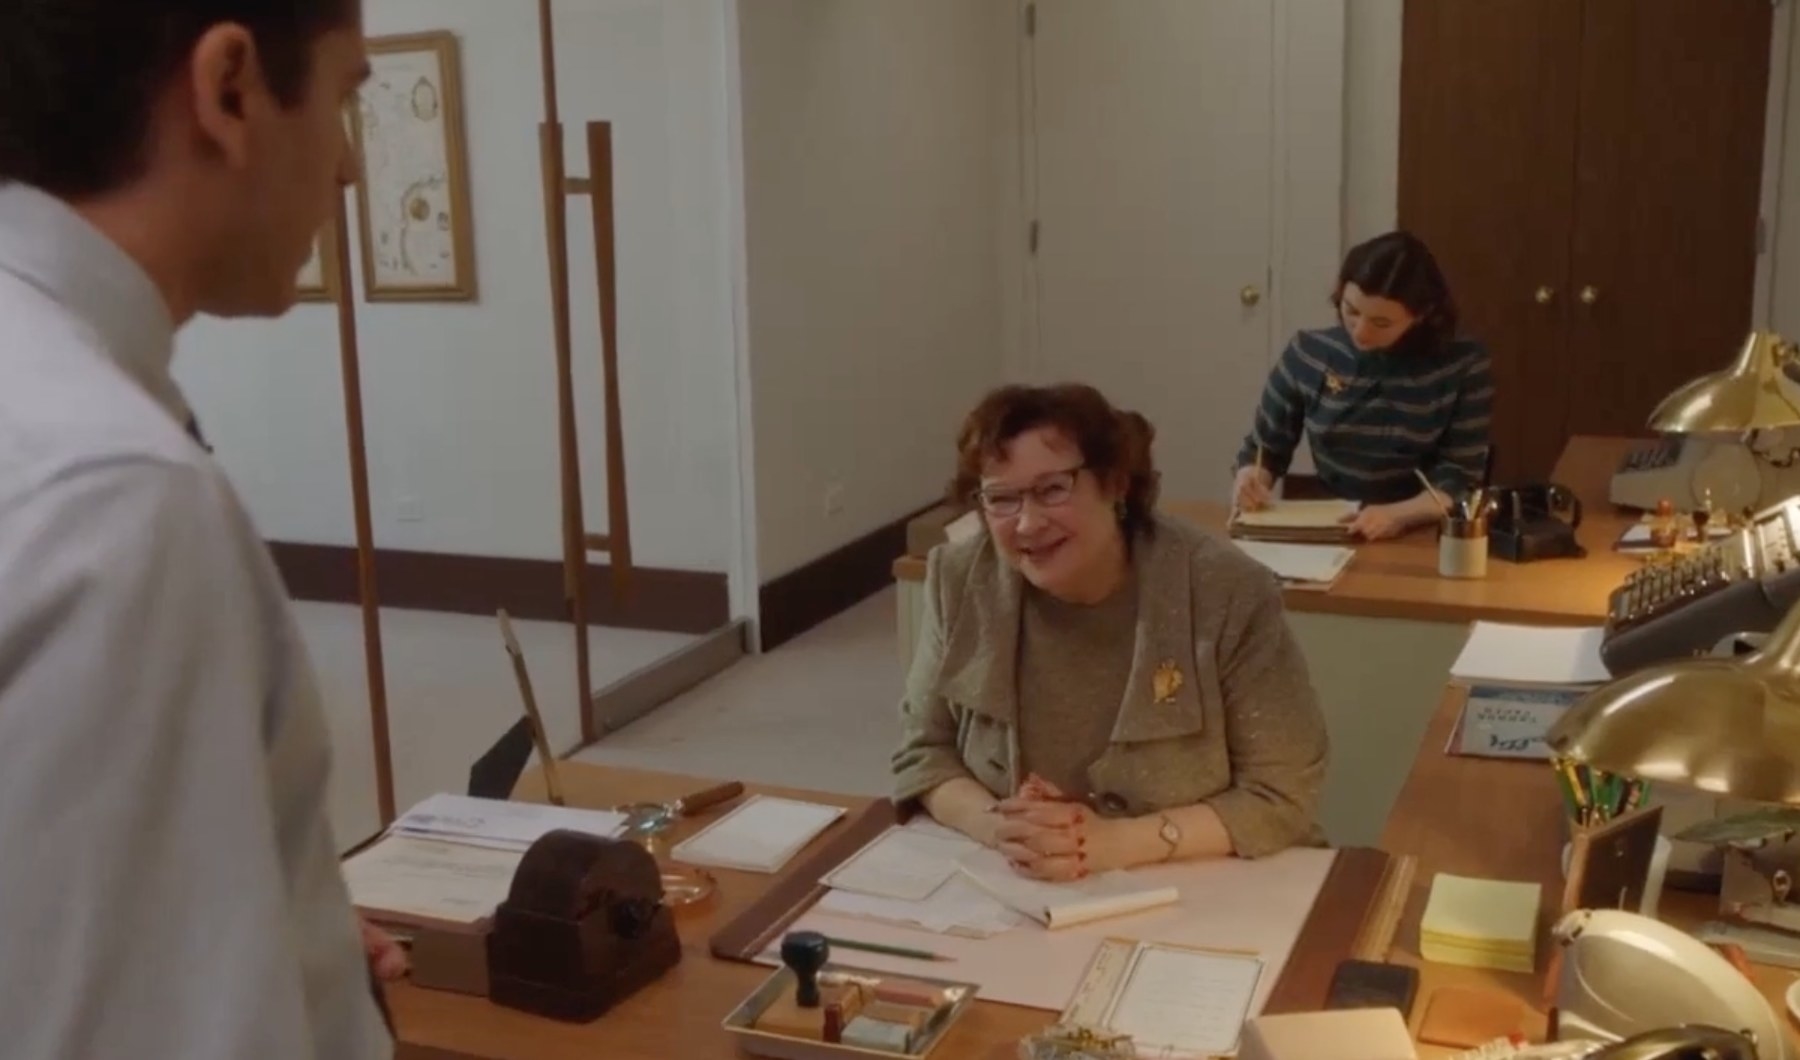 Mrs. Moscowitz at her desk in mrs. maisel